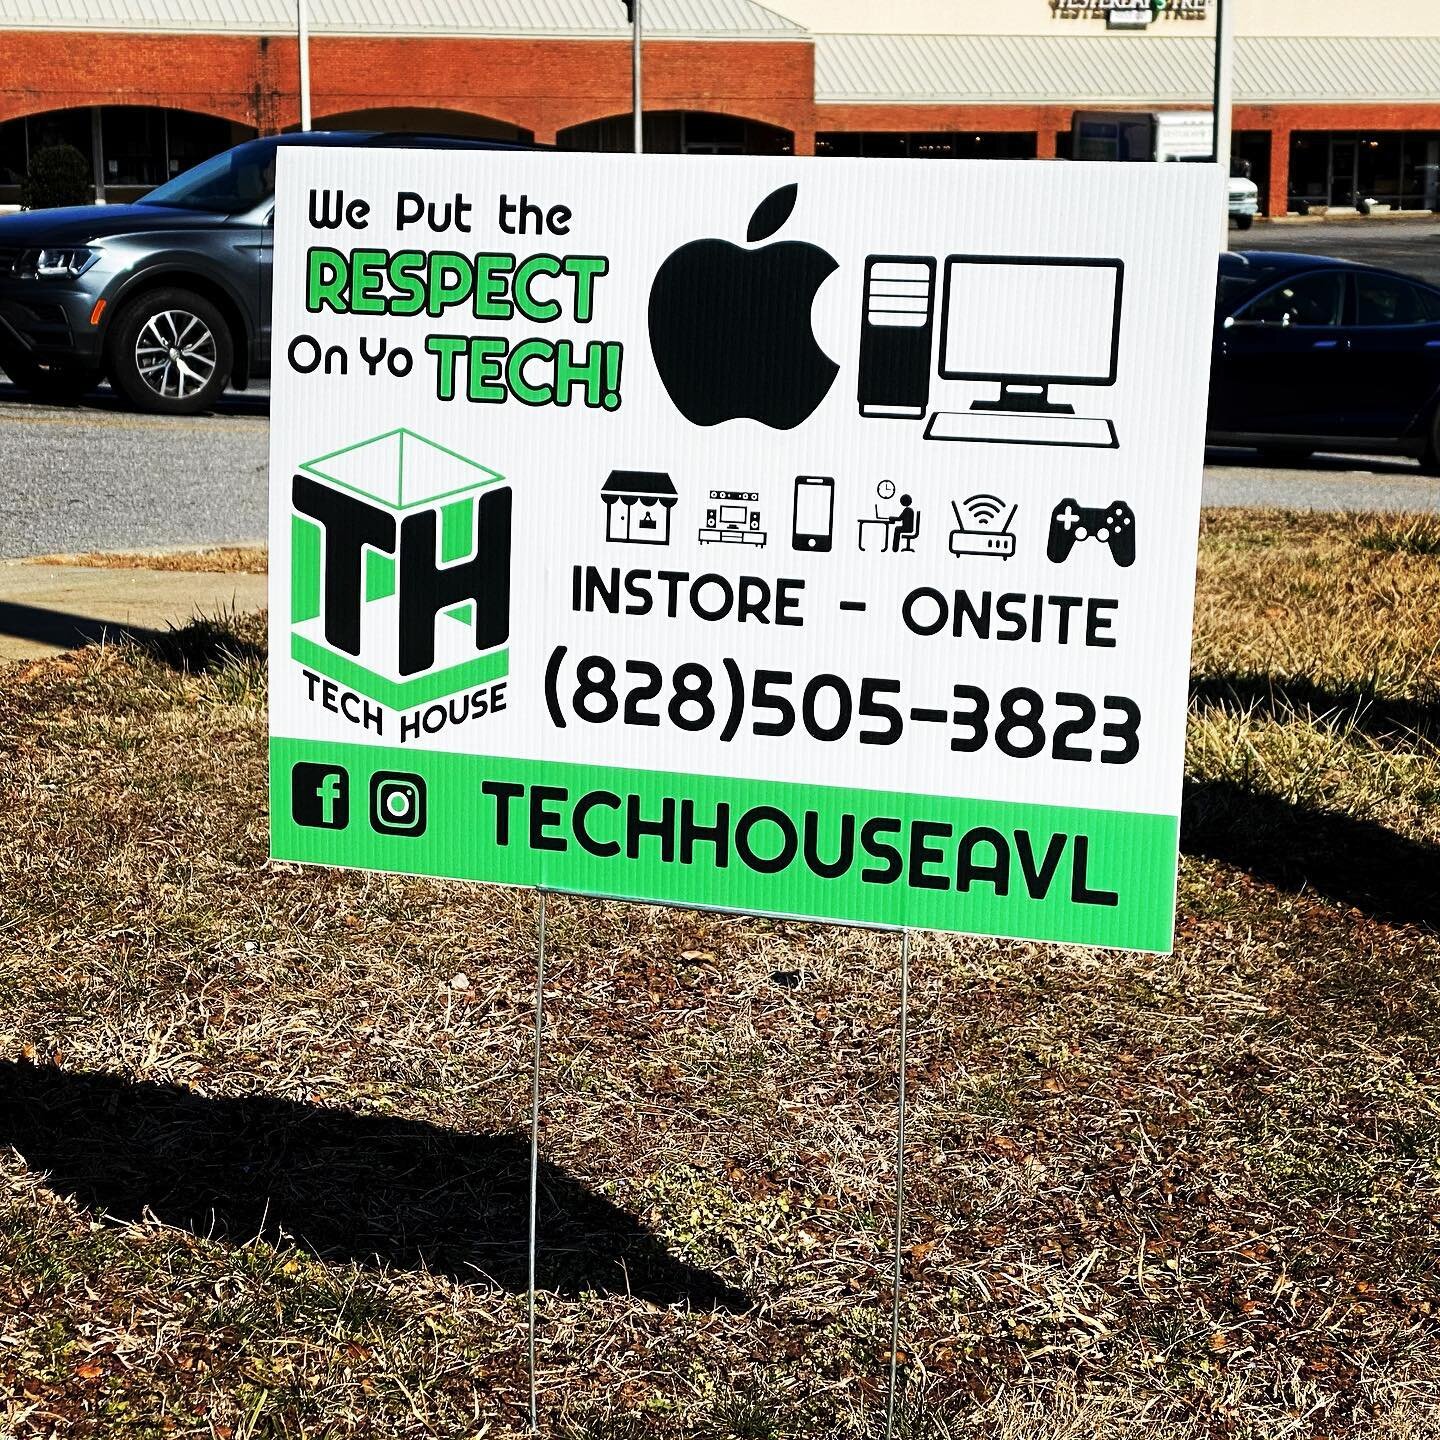 &ldquo;We Put the RESPECT On Yo TECH!&rdquo;
Good morning and a happy Wednesday! Yard-signs are up! Let us know if you spot any! 

Where should we put more?

#downtownavl #minorityownedbusiness #blackhistorymonth #computerrepair